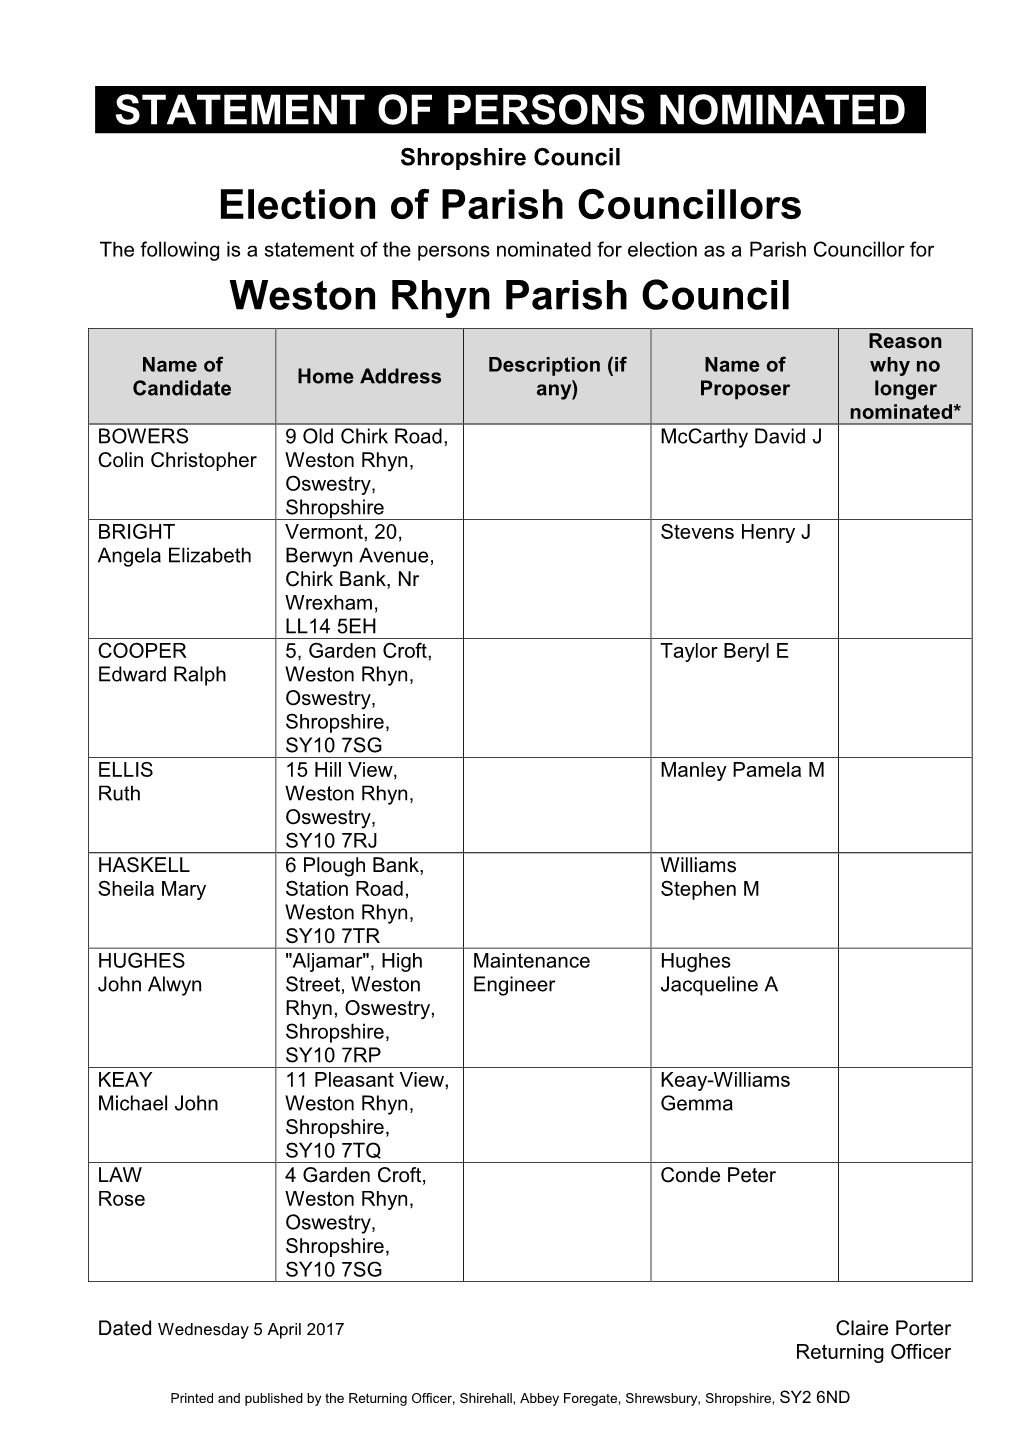 STATEMENT of PERSONS NOMINATED Election of Parish